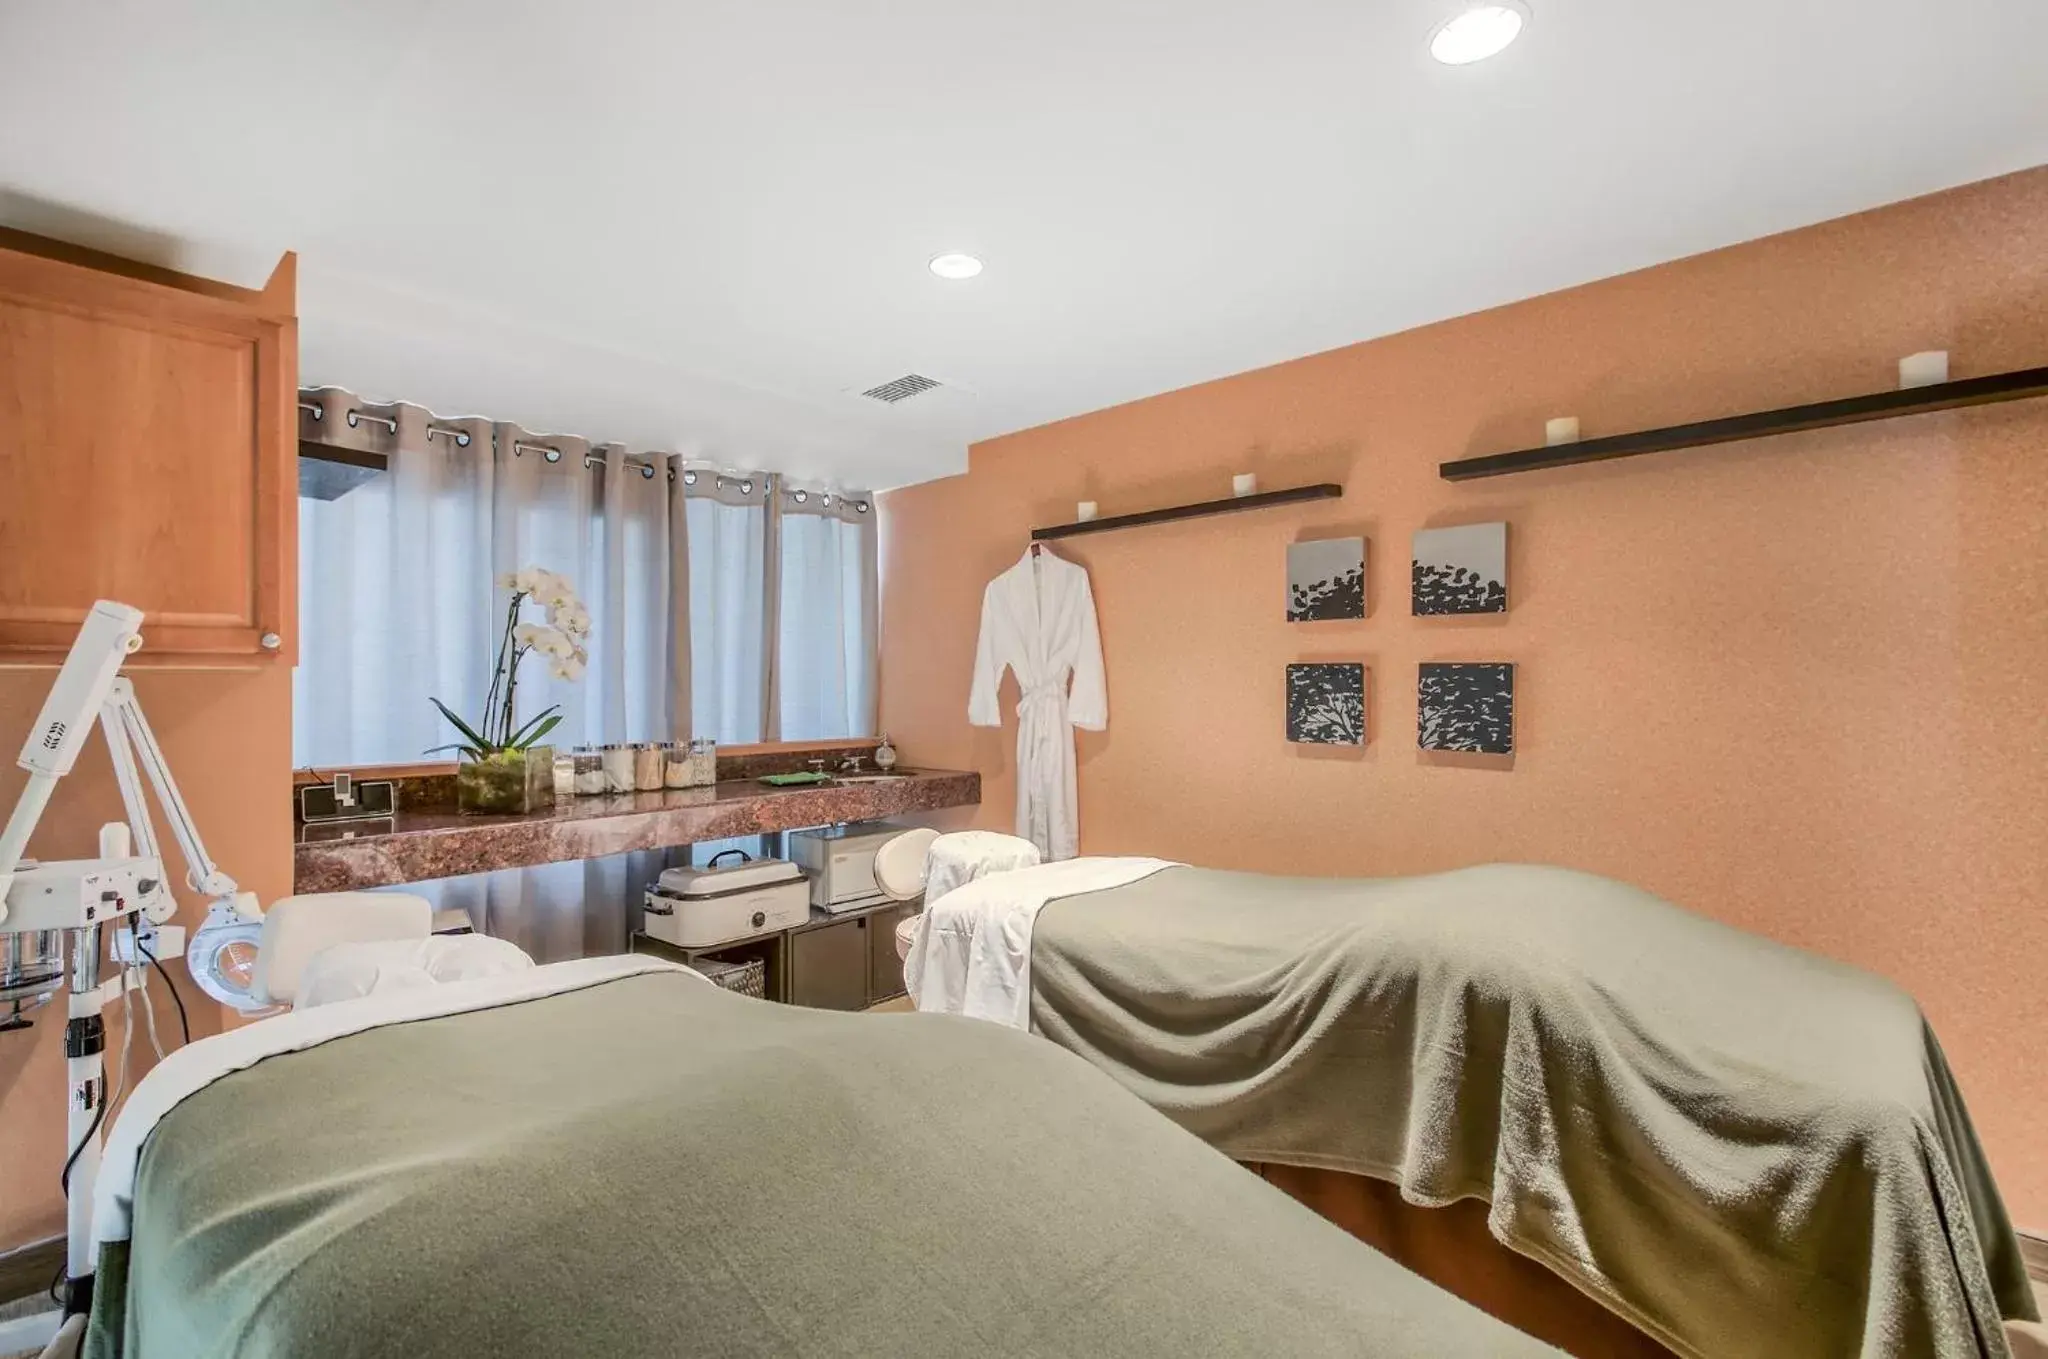 Spa and wellness centre/facilities in Omni Los Angeles Hotel